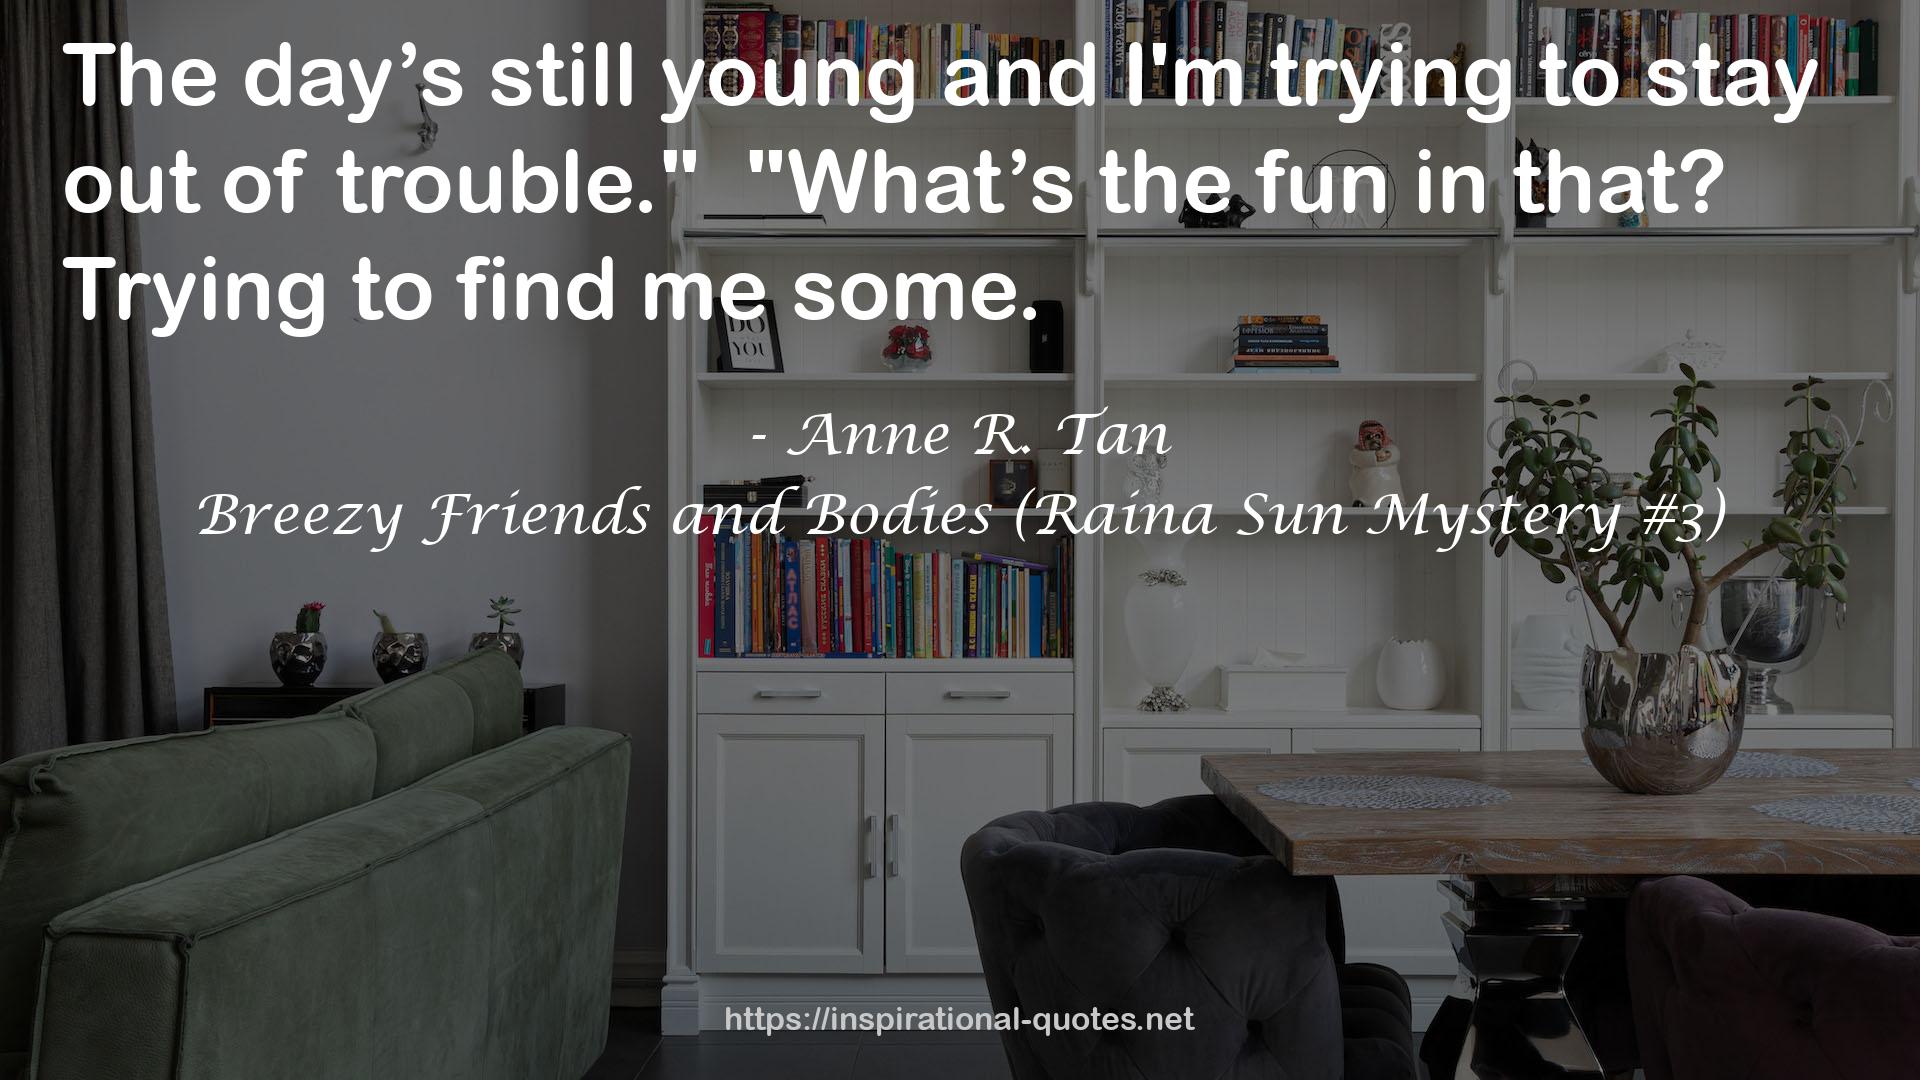 Breezy Friends and Bodies (Raina Sun Mystery #3) QUOTES